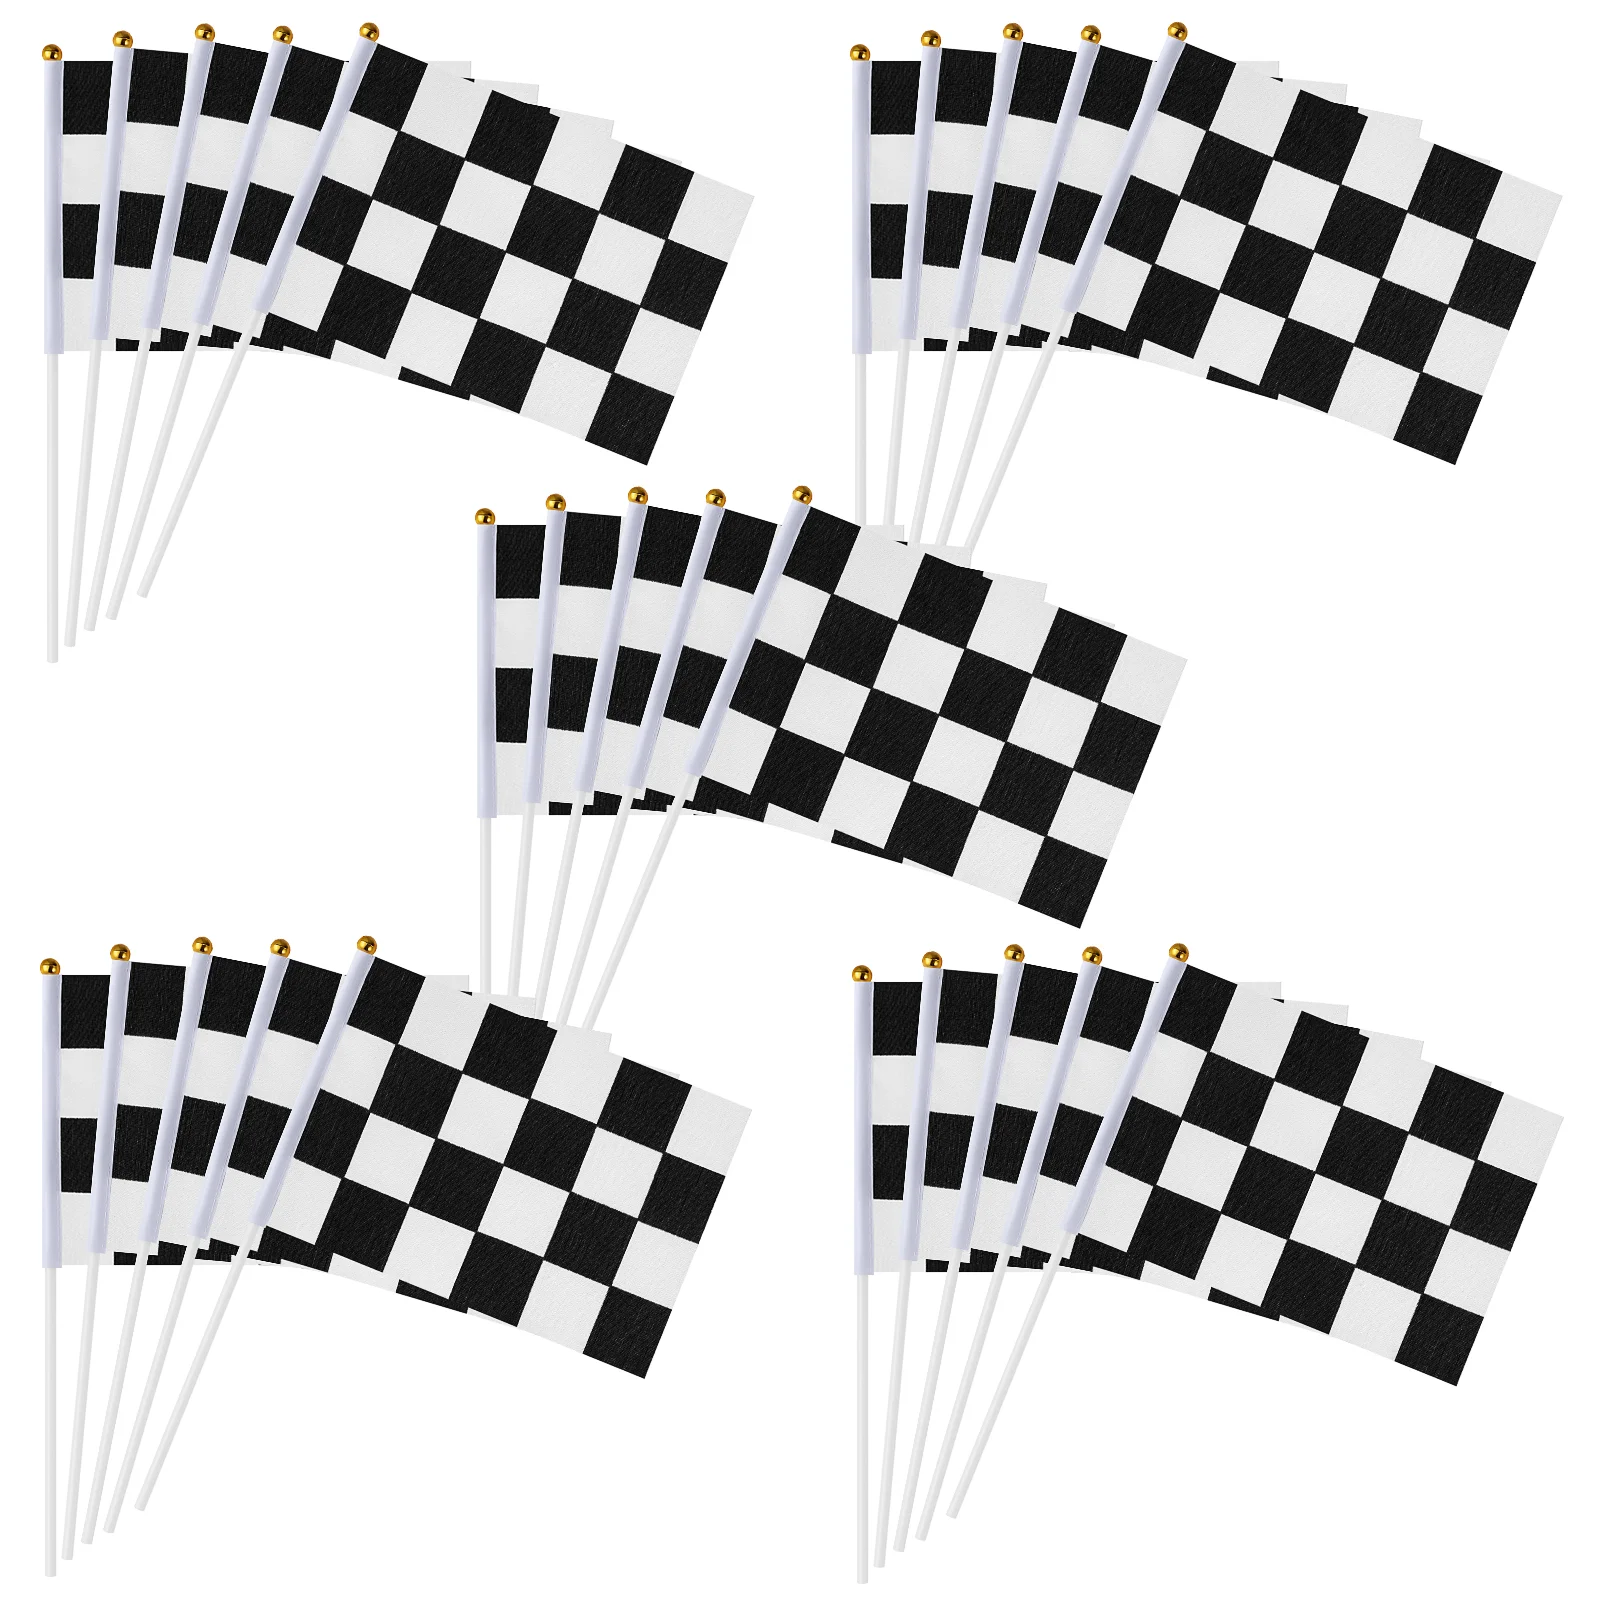 

Flags Racing Checkered Party Flag Car Decorations Race Supplies White Black Birthday Stick Cars Sticks A Bulk Theme Day